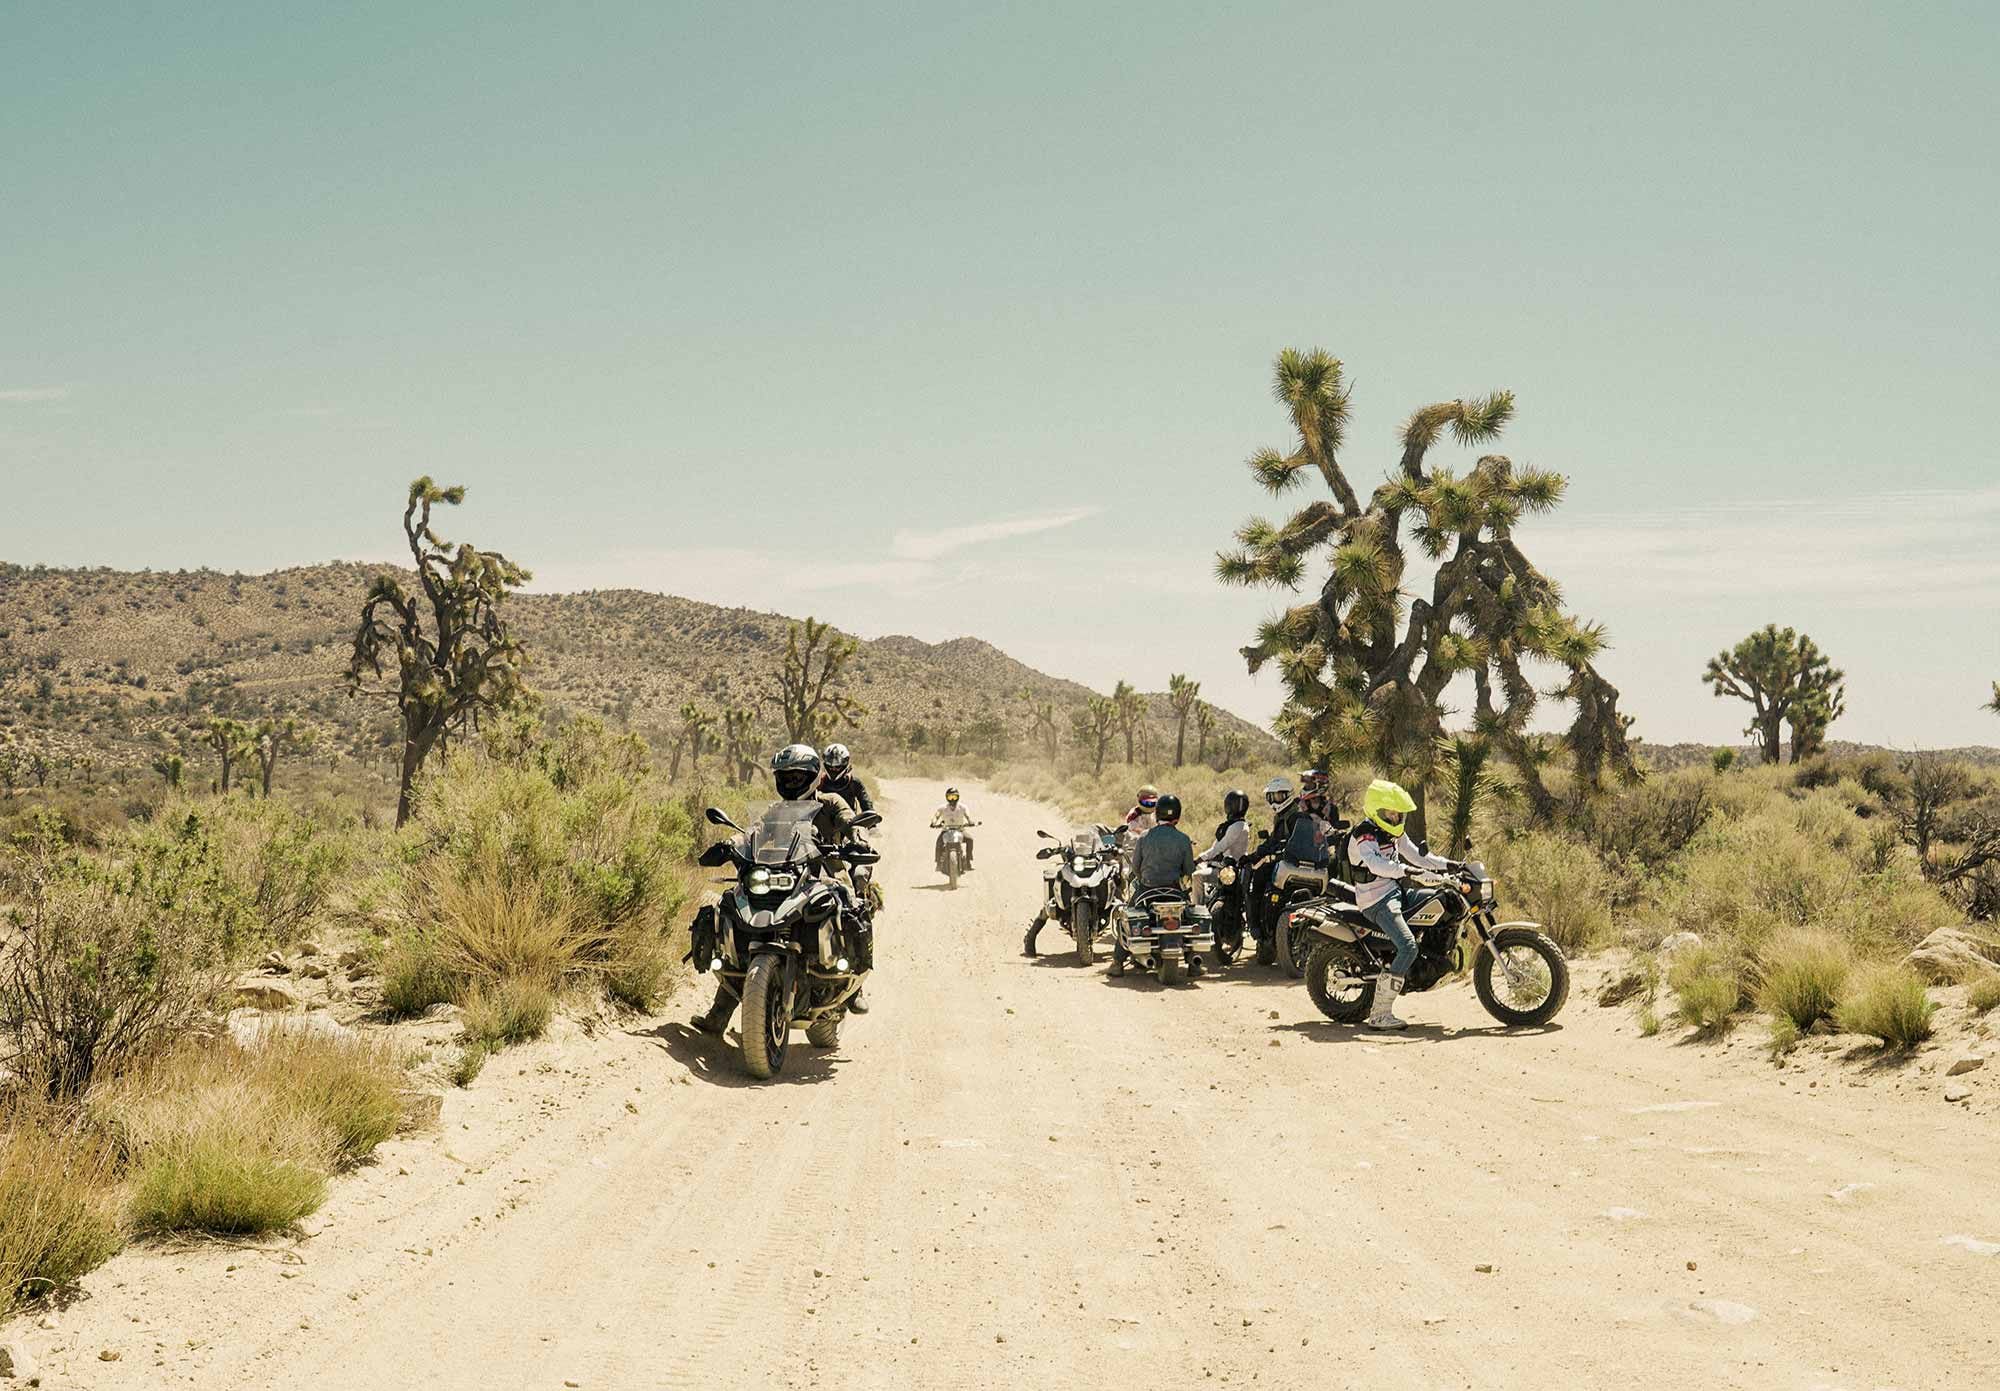 Big adventure bikes, scramblers, and of course Fox on his Road King.